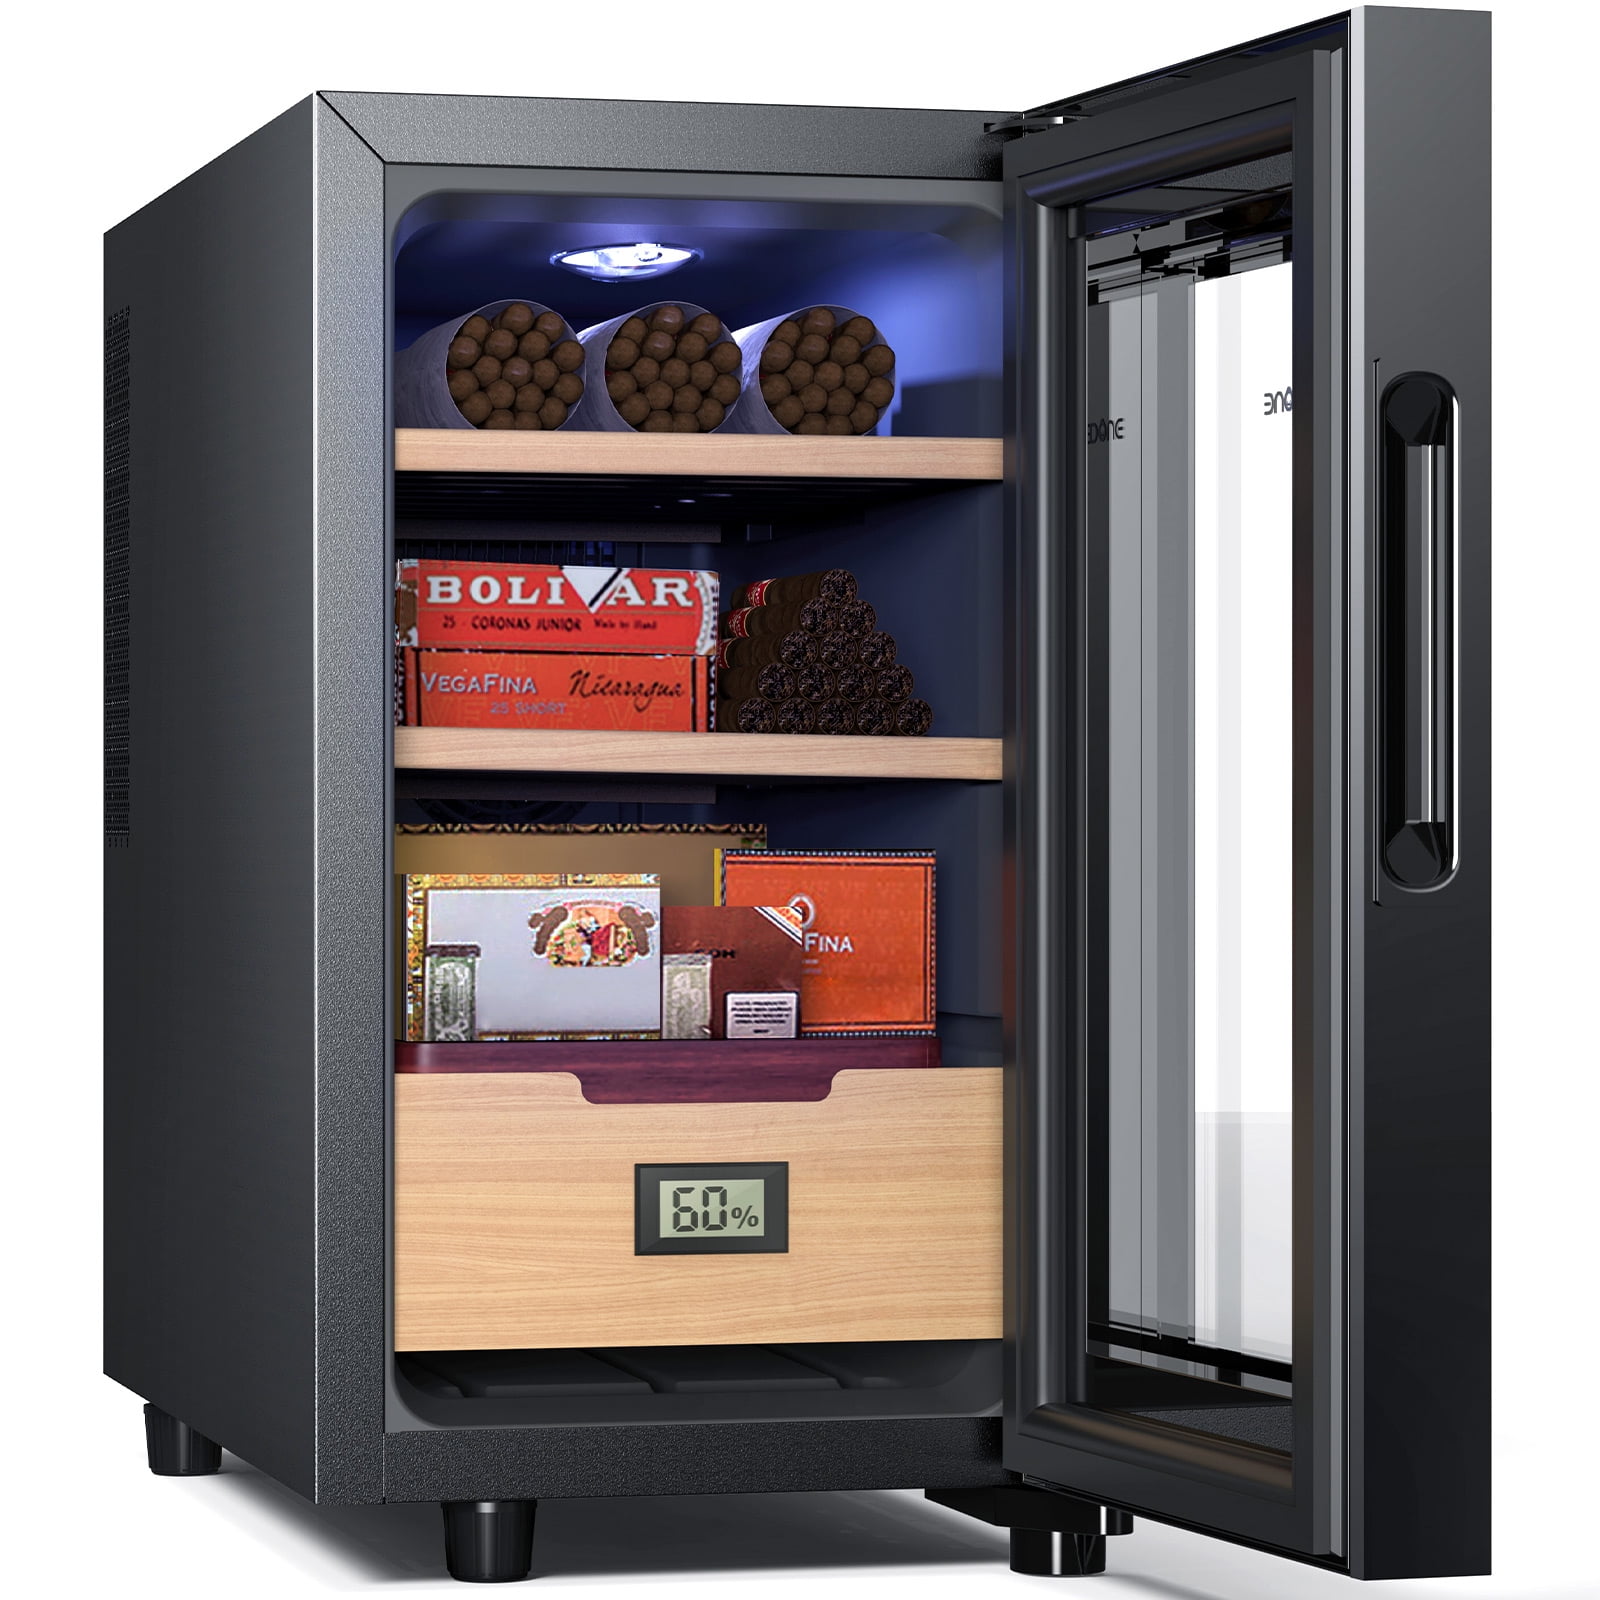 NEEDONE 23L Electric Cigar Humidor for Counts, With Cooling & Humidity Control System,With Spanish Cedar Wood Shelves,Gifts for Men Walmart.com